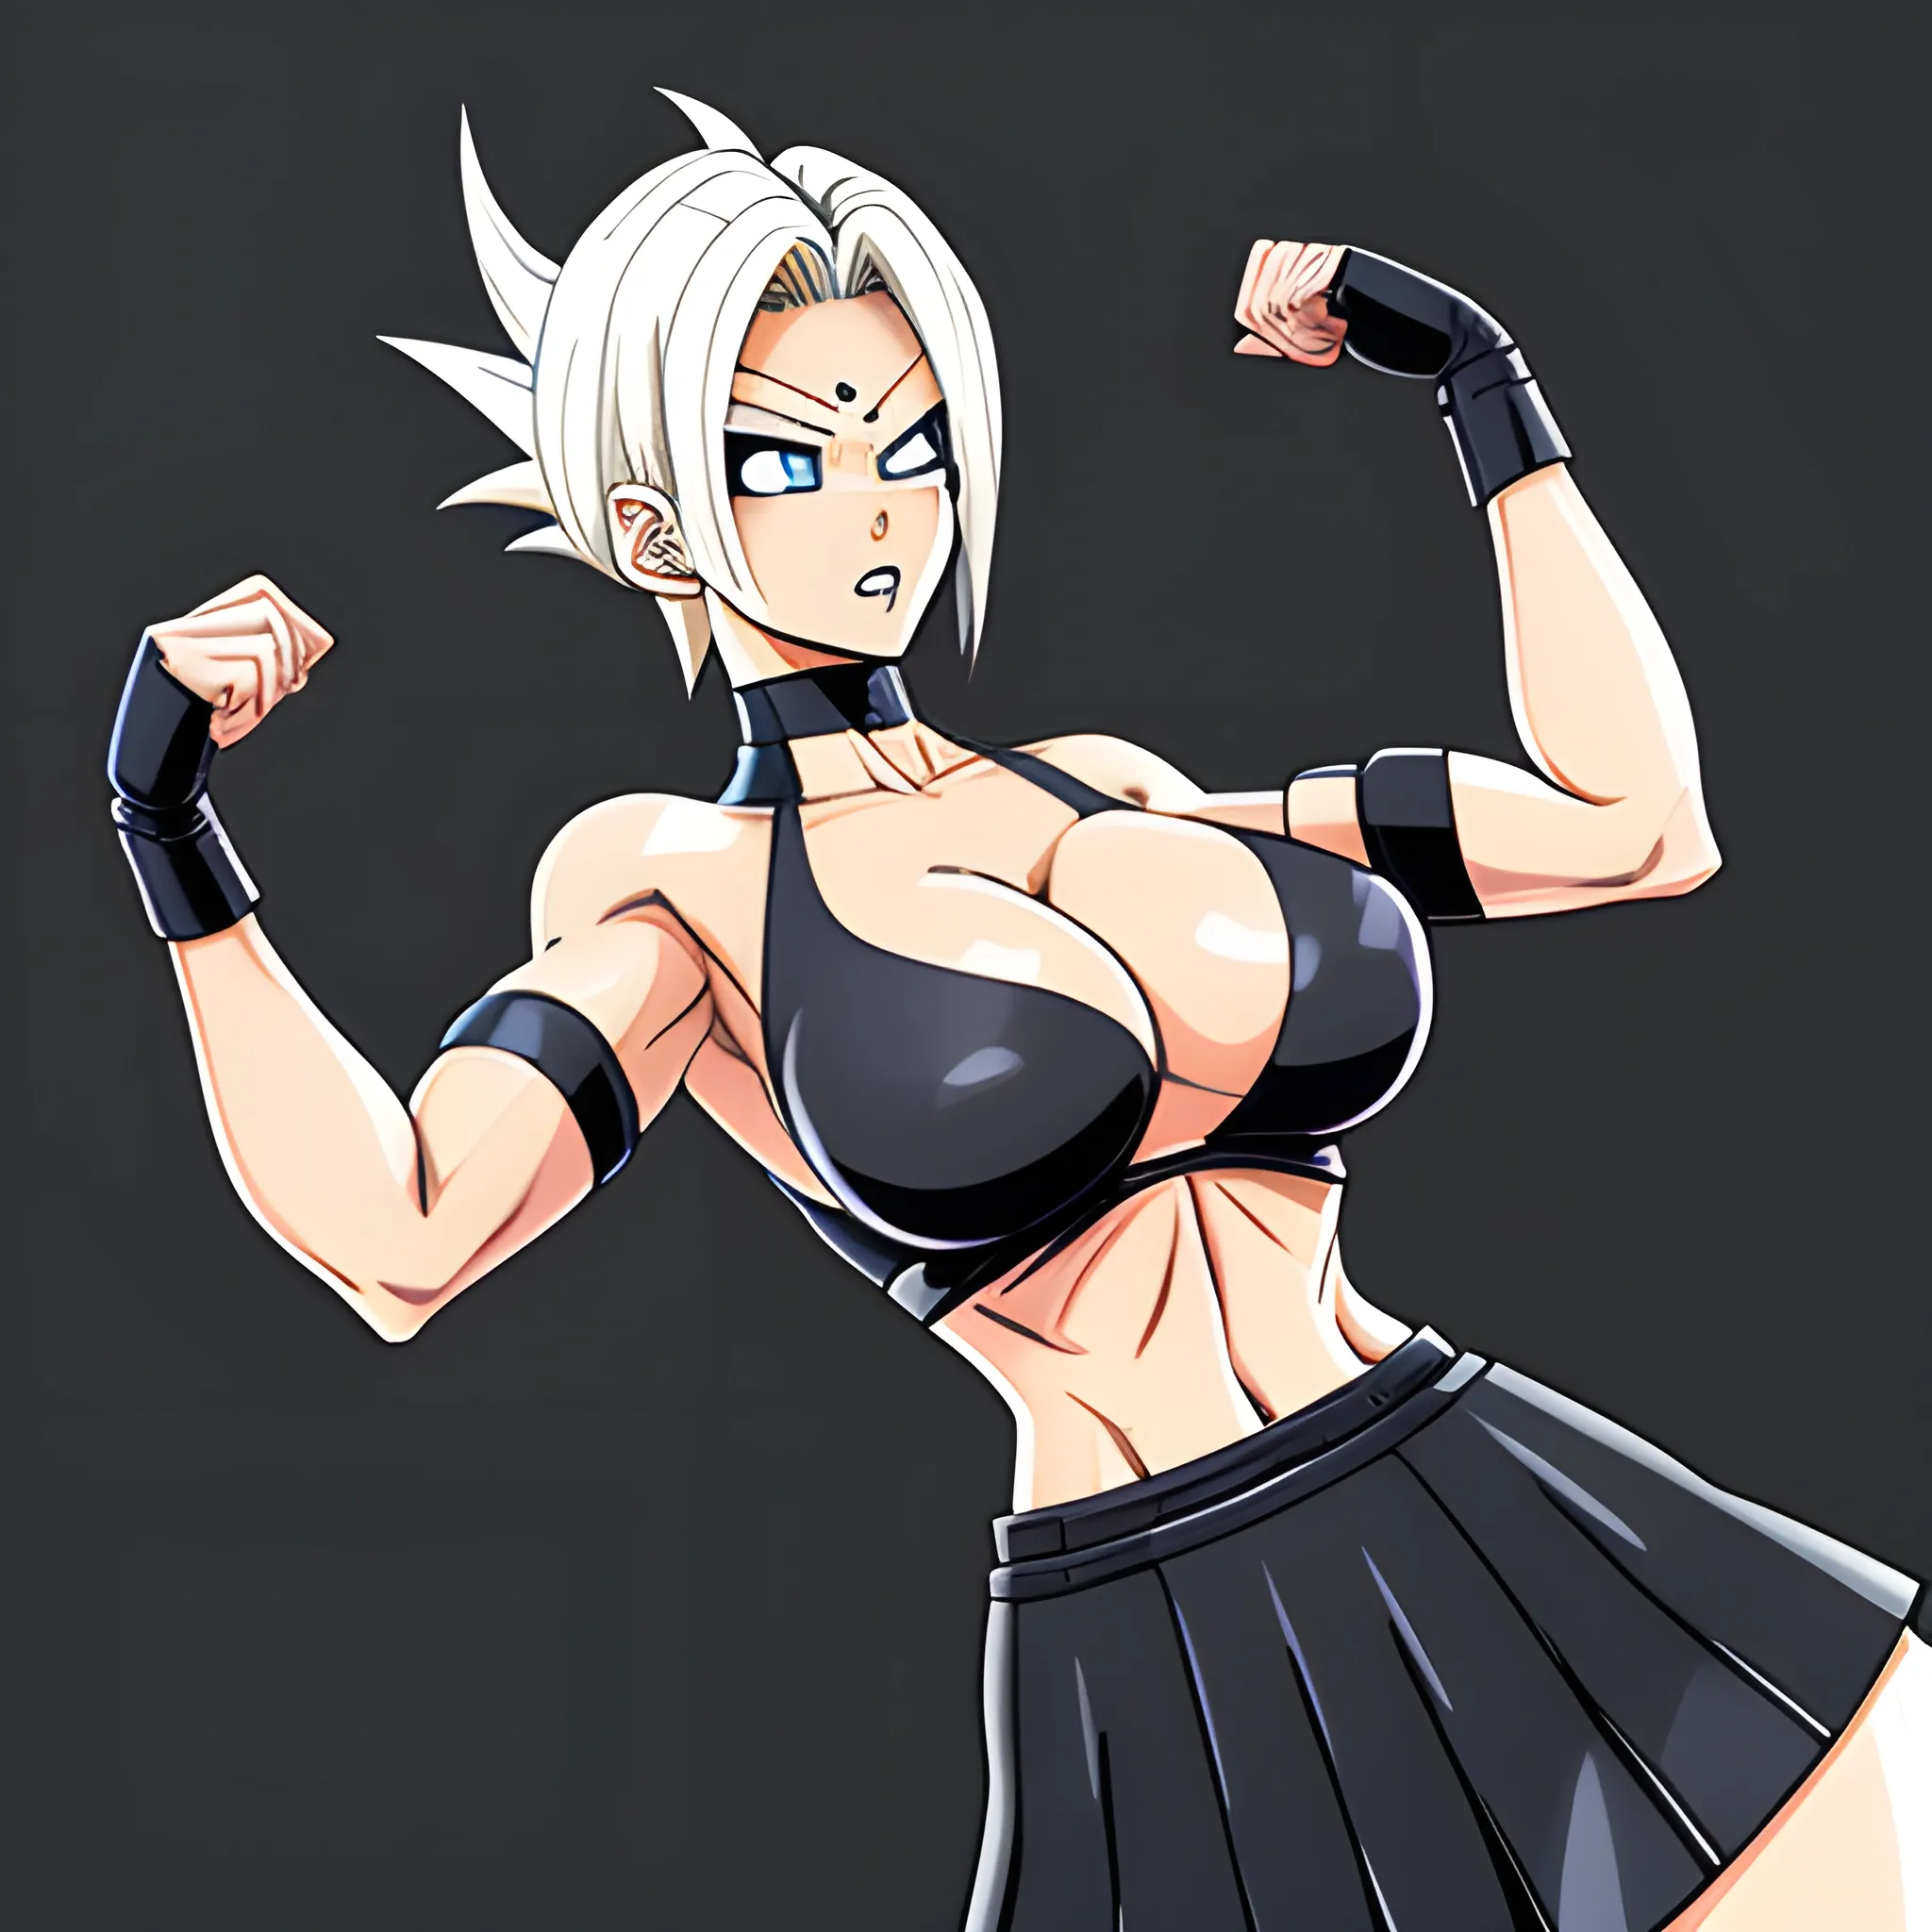 1 girl, short straight blonde hair, blue eyes, pierced left eyebrow, D-cup breasts, wide hips, toned thighs, six pack, white long-sleeved top with black stripes mid-length, black skirt, black pantyhose, black sneakers, dragon ball z art style